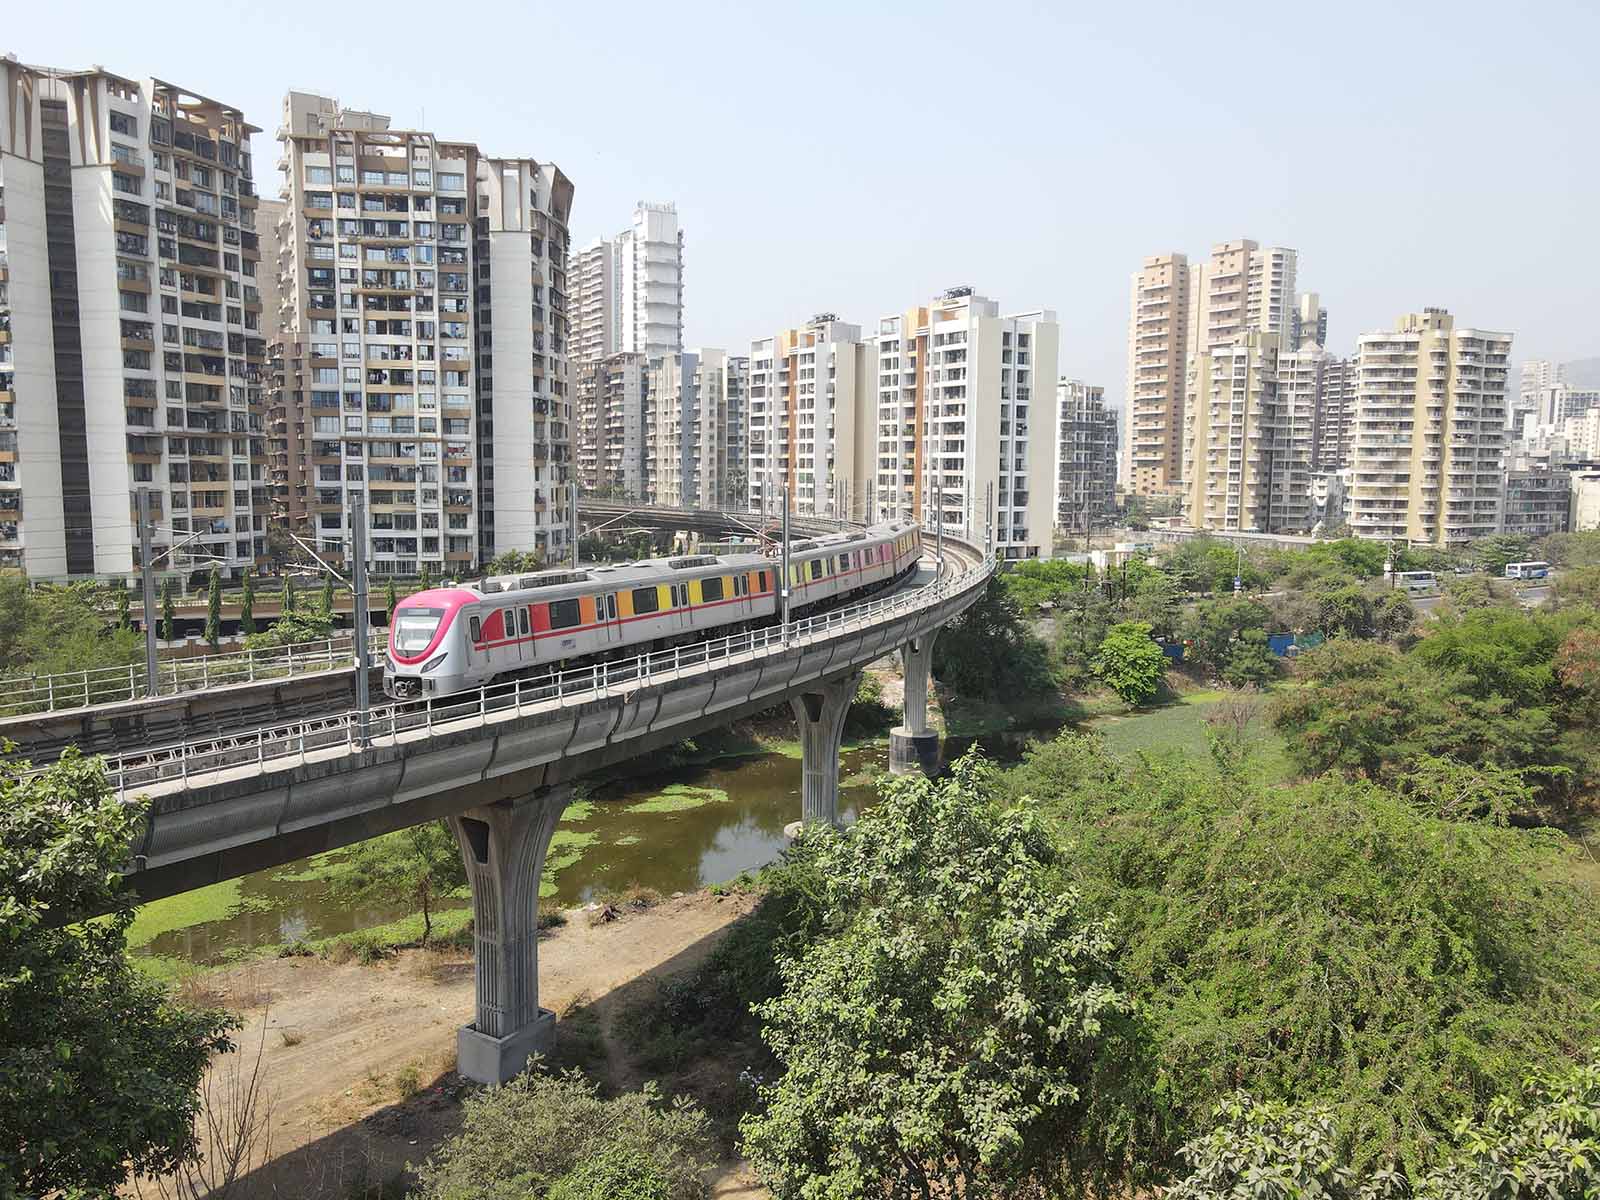 CIDCO Navi Mumbai Metro receives overwhelming response from citizens  4 lakh passengers travelled within one month